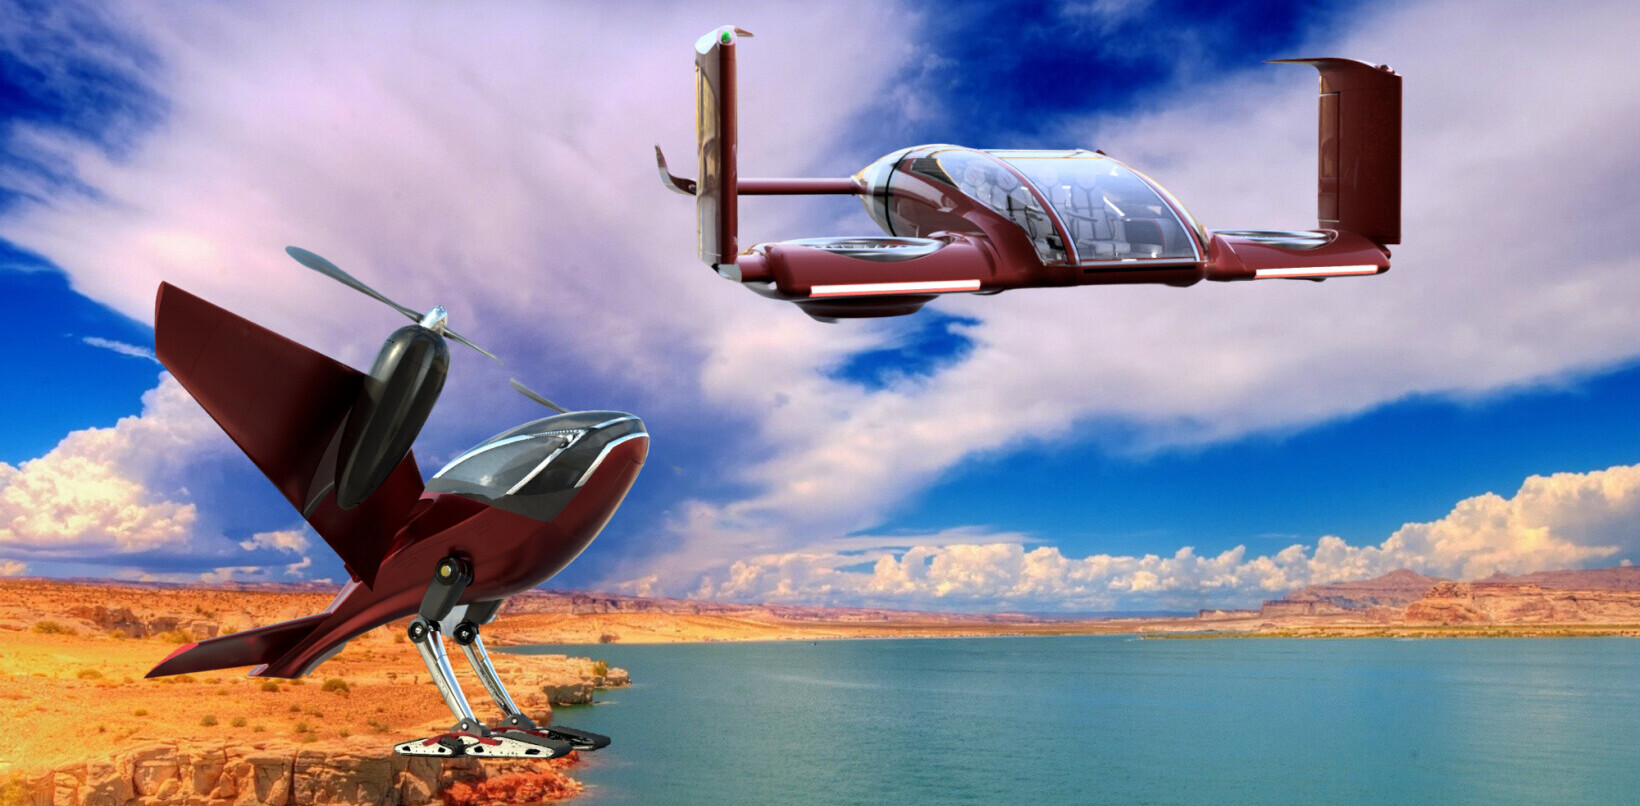 These wild flying machines are set to shake up the VTOL world